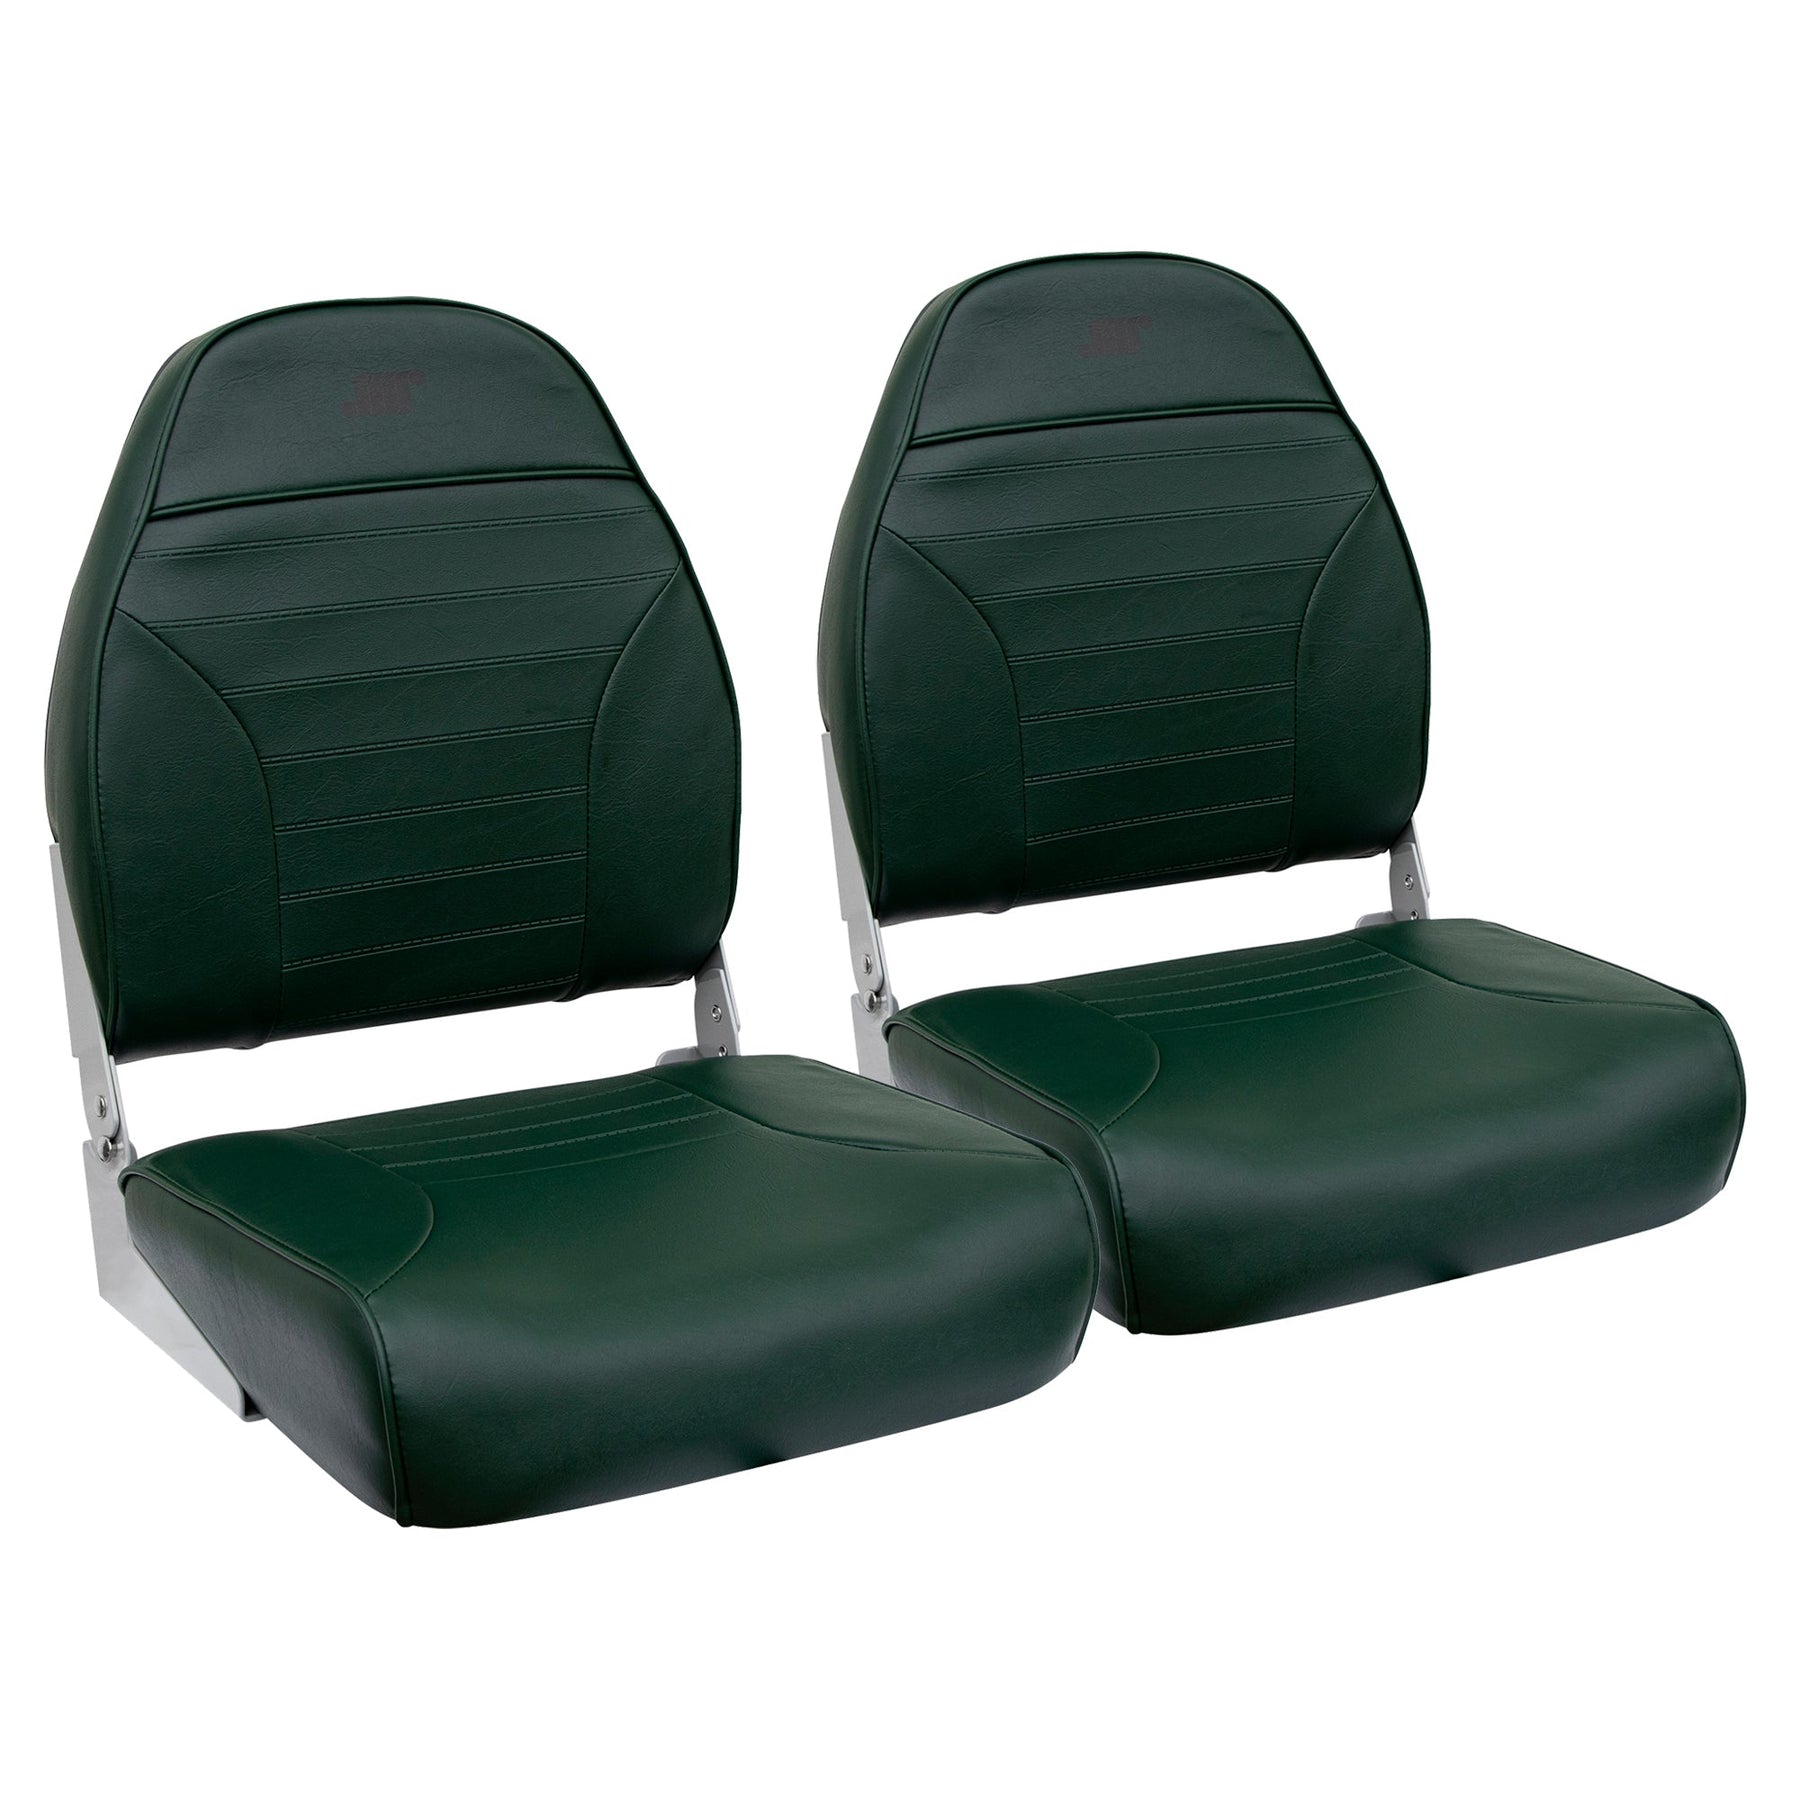 Wise 8WD588PLS Traditional High Back Fishing Seat - Double Pack